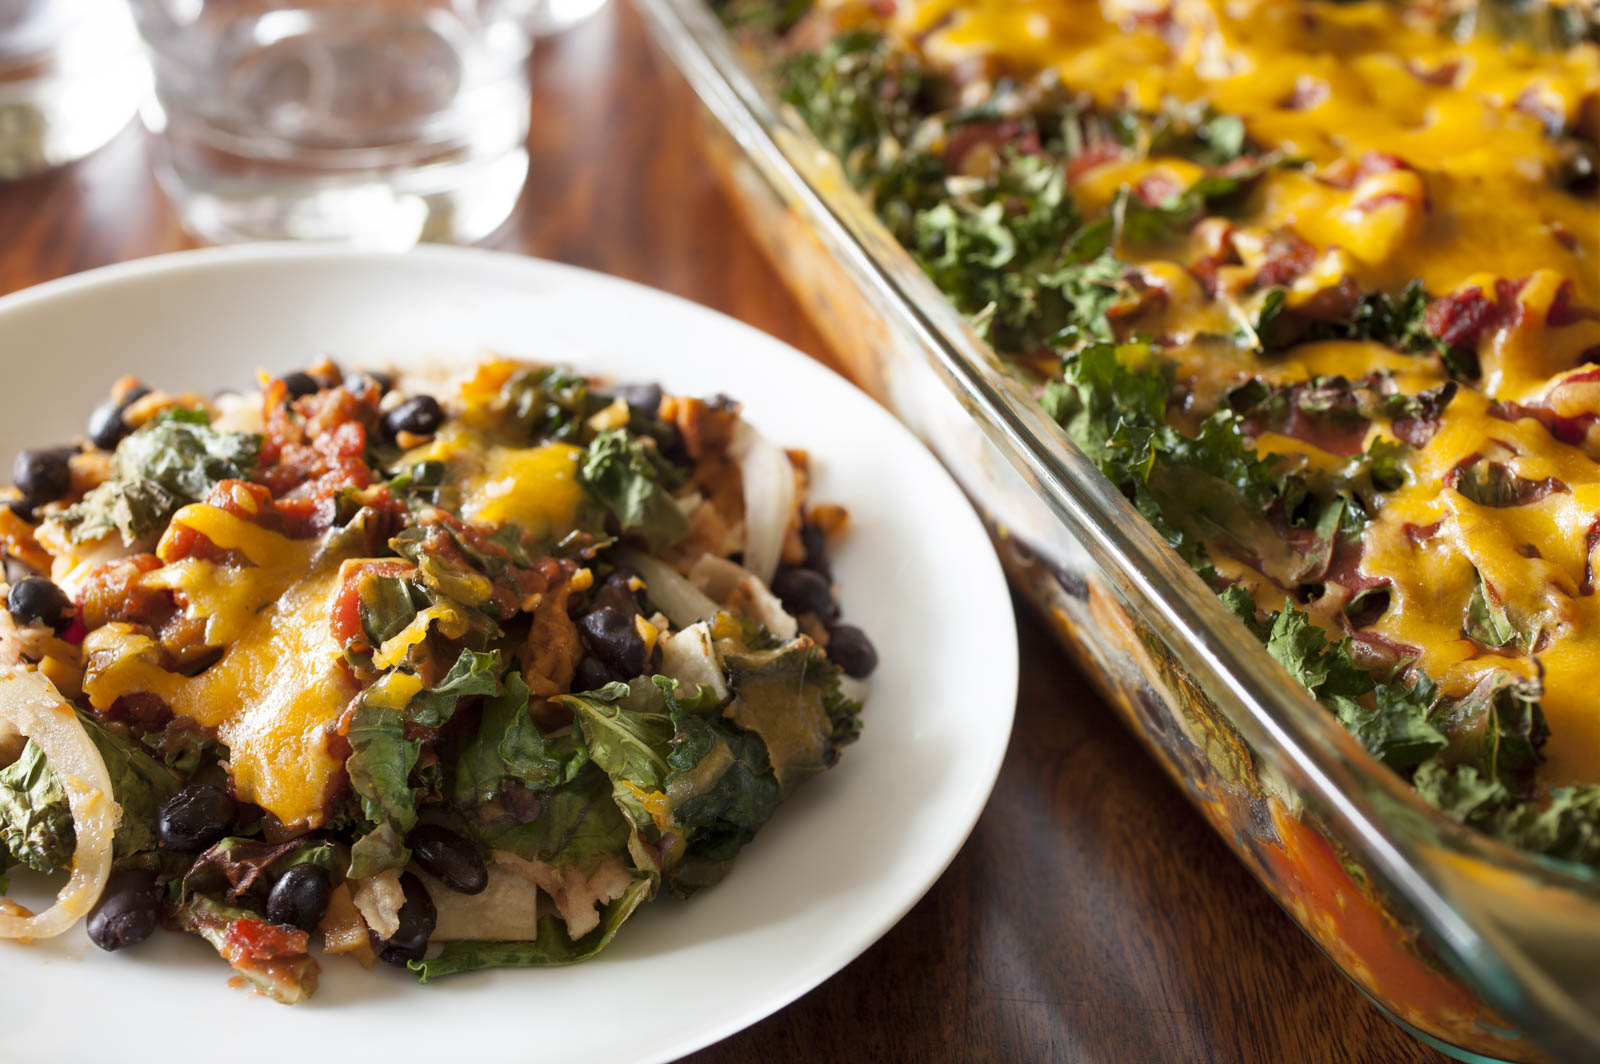 Easy Enchilada Casserole with Kale and Sweet Potatoes Dinner Recipe